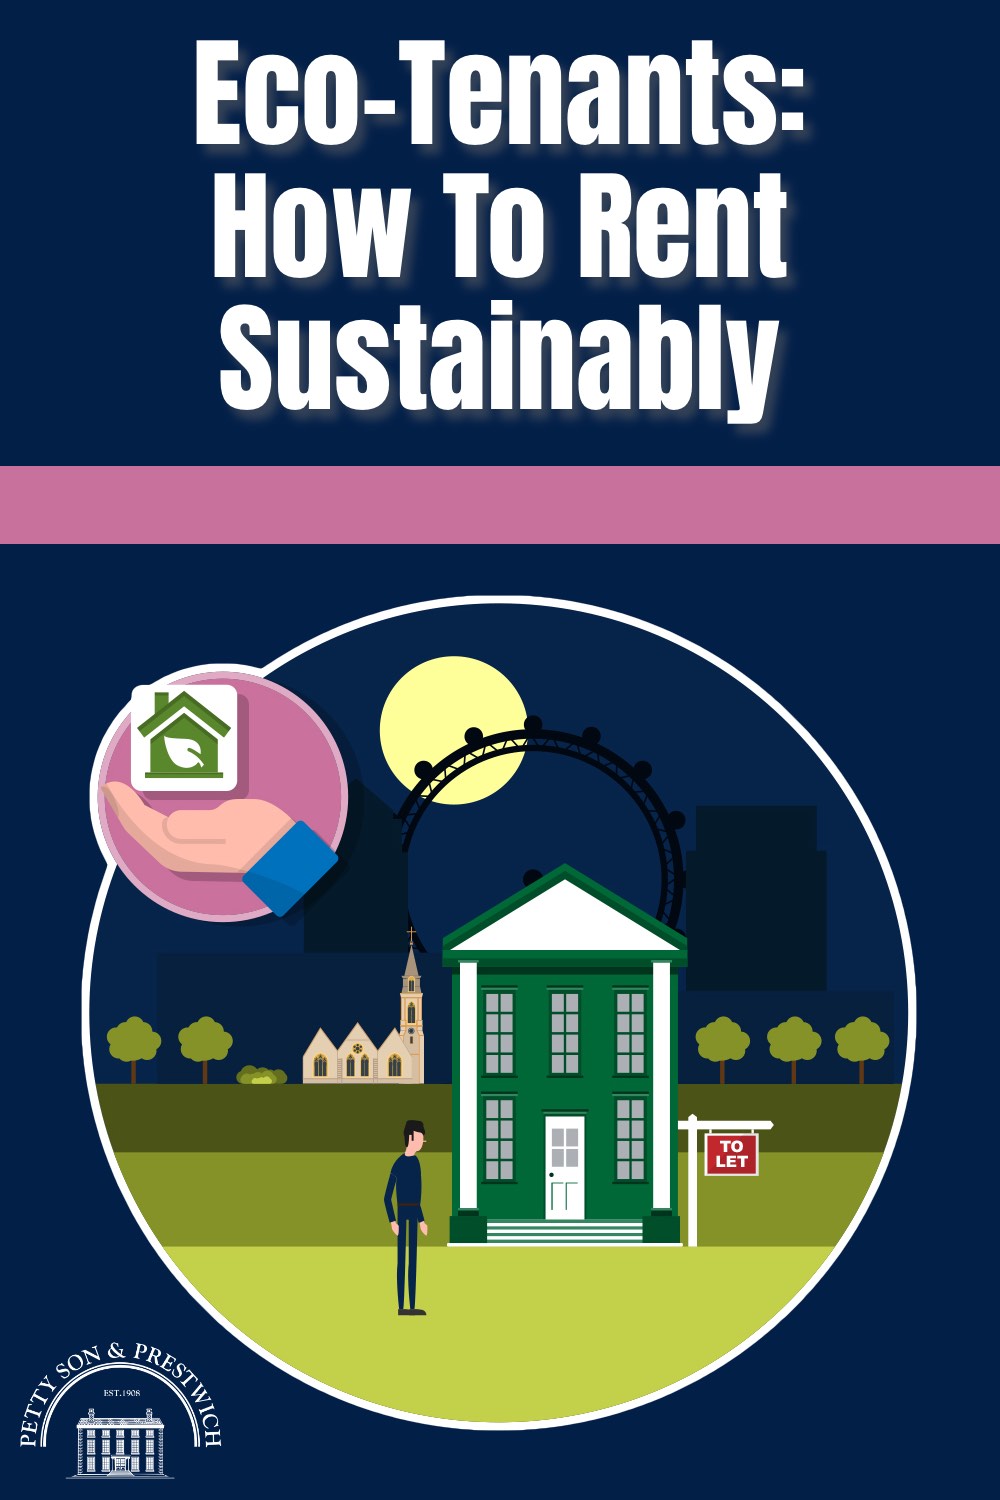 eco tenants guide to renting sustainably